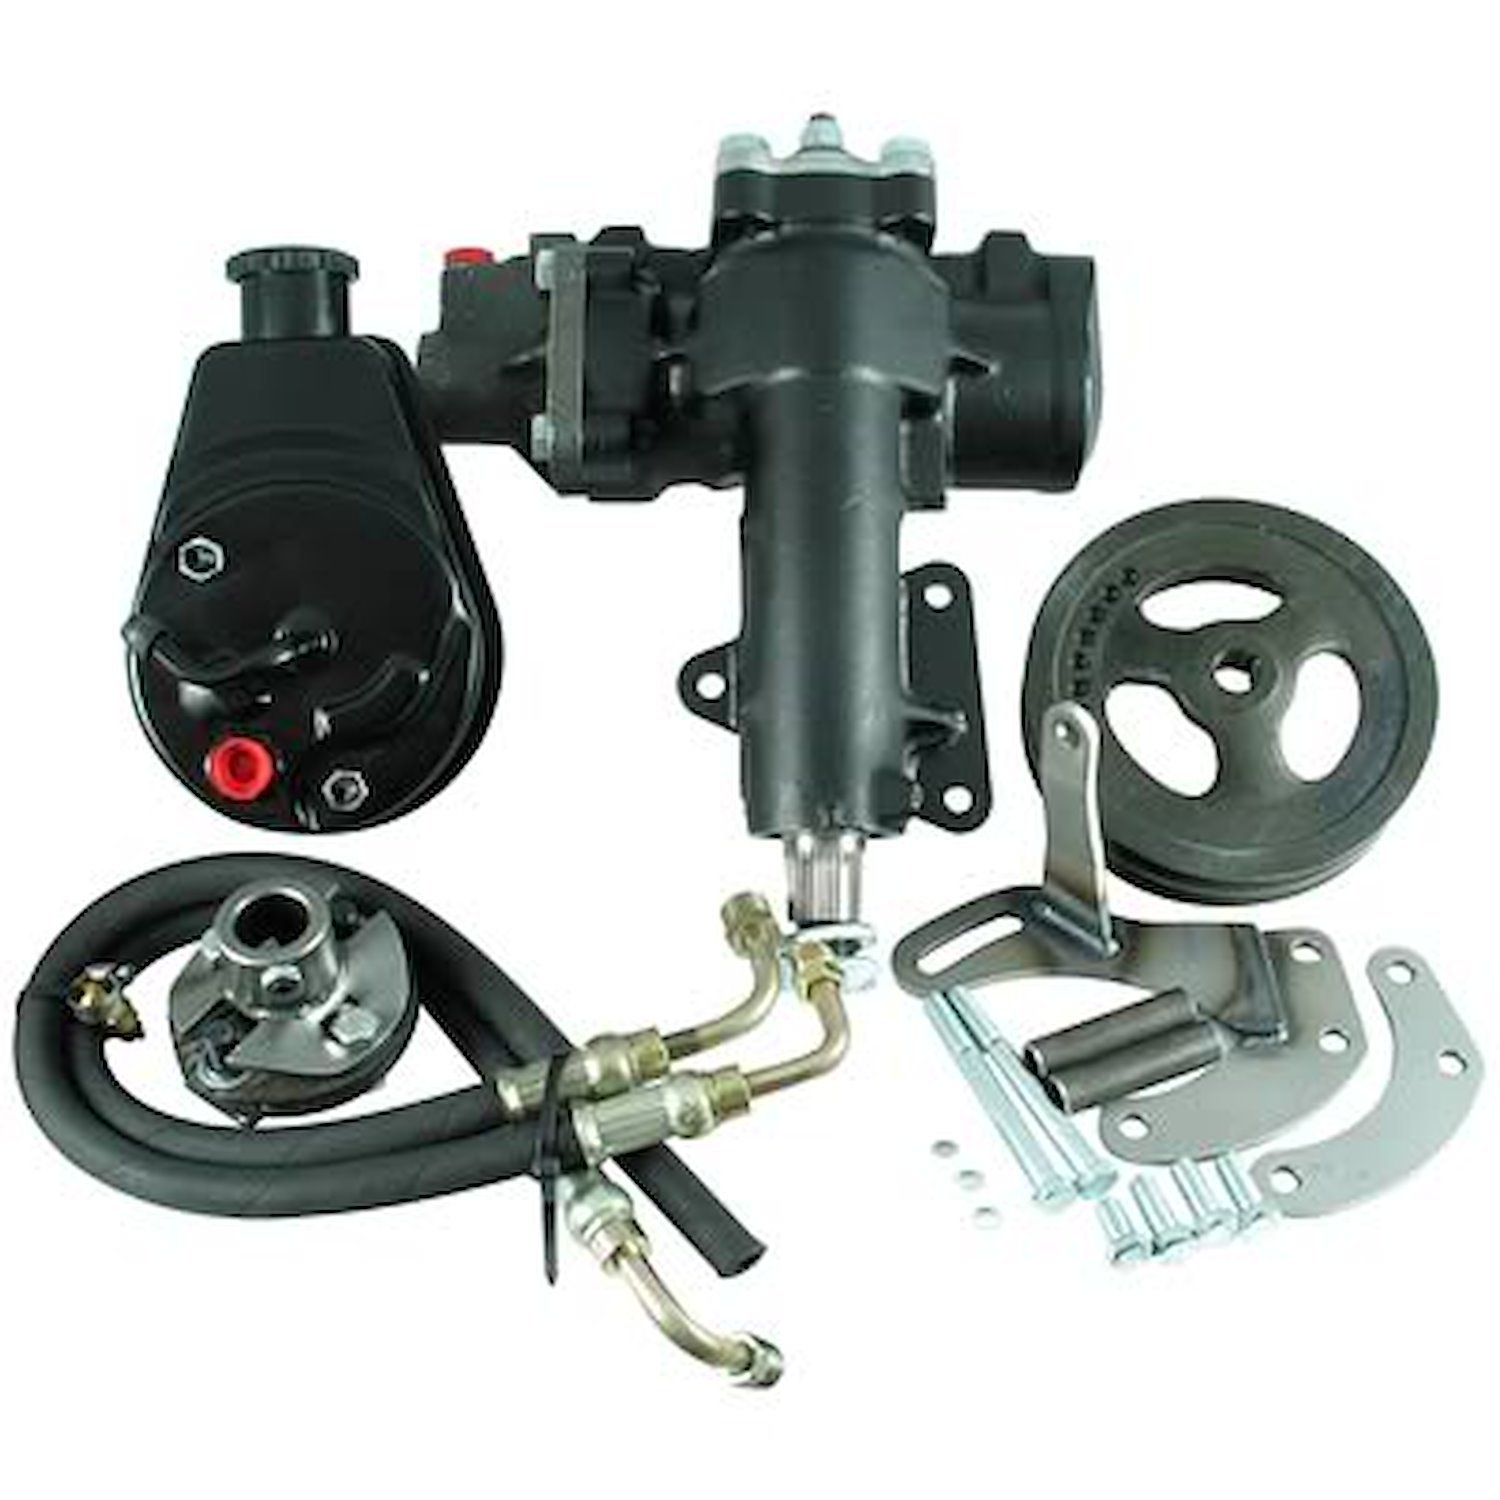 Complete Power Steering Conversion Kit 1967-82 Corvette with